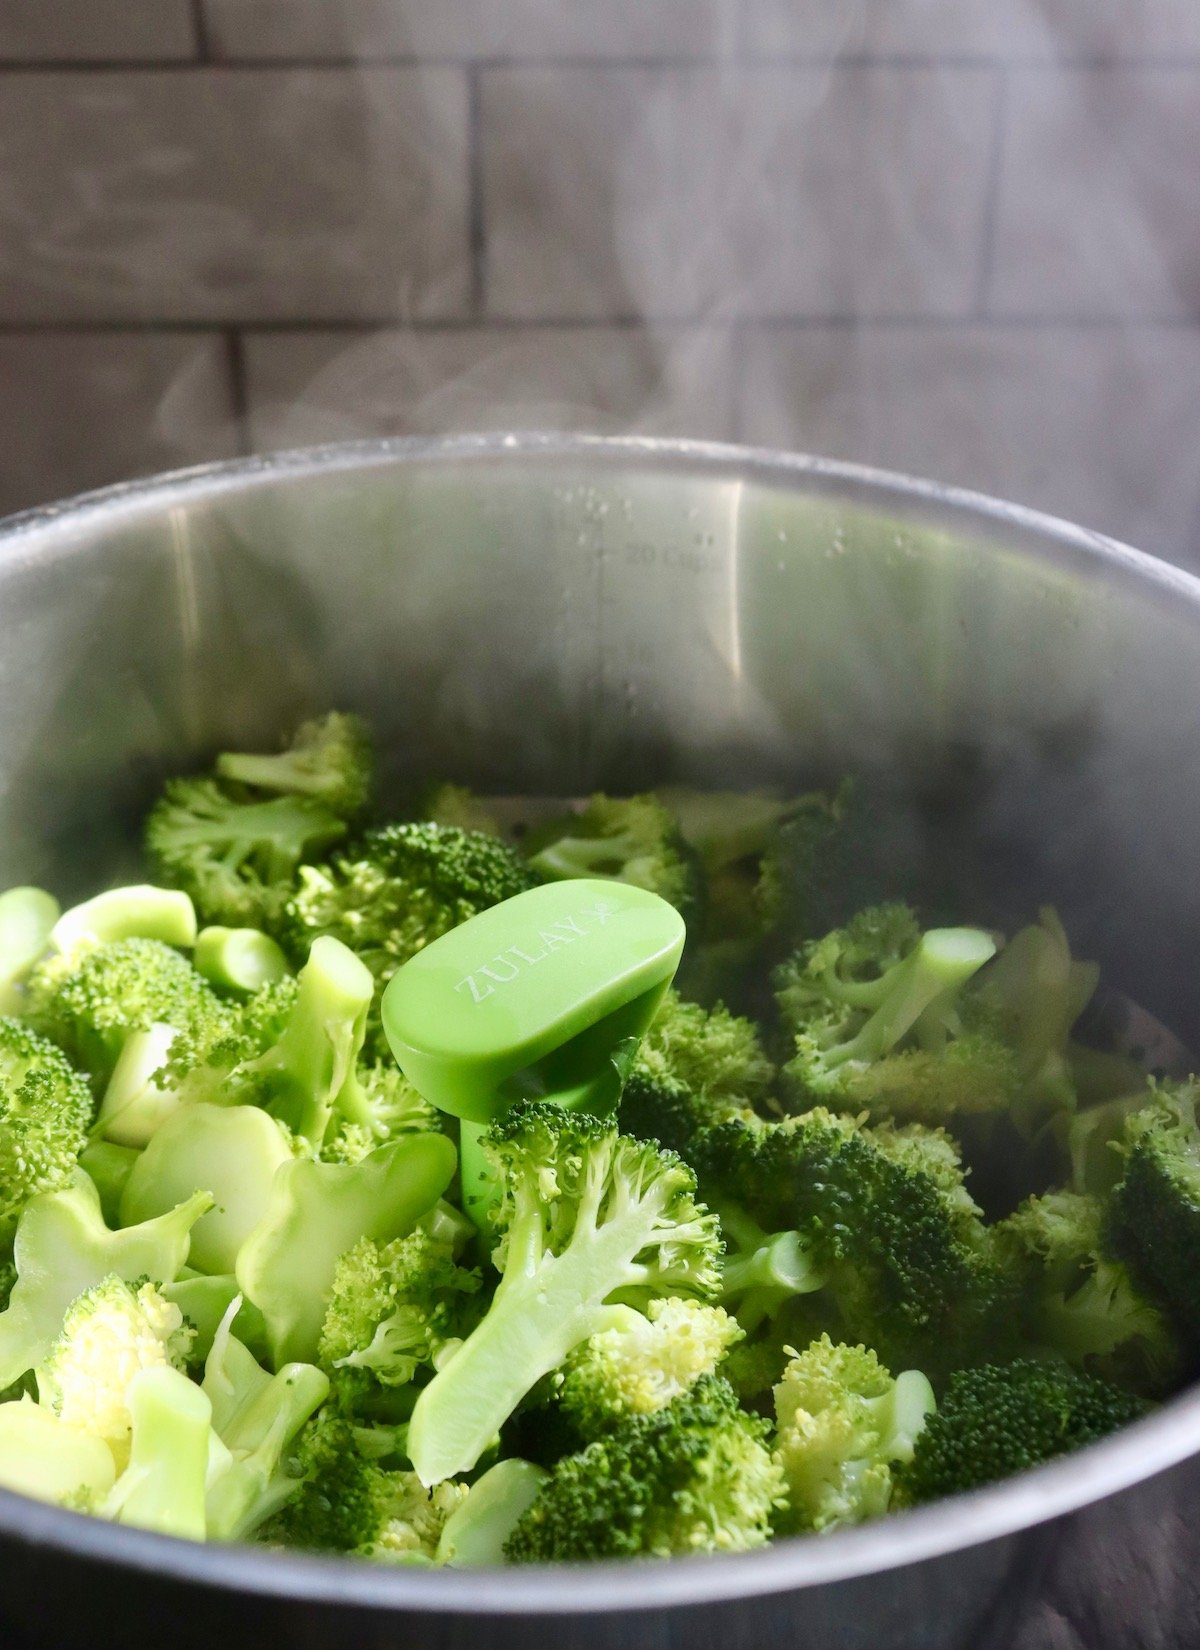 Pot with freshly steamed broccoli, with steam coming from it.